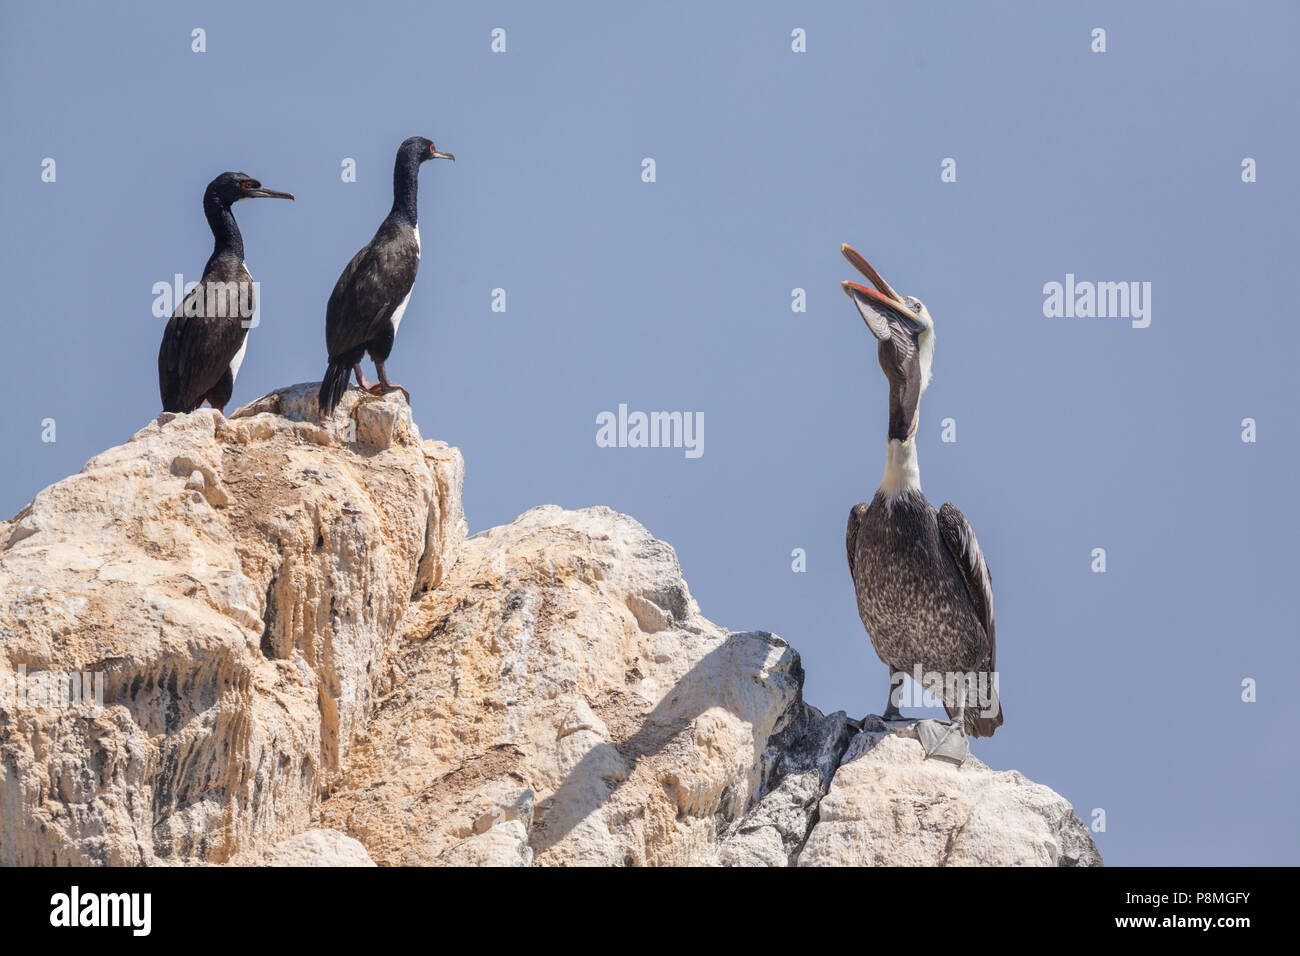 Peruvian Pelican and two Guanay Cormorants standing on a rock Stock Photo